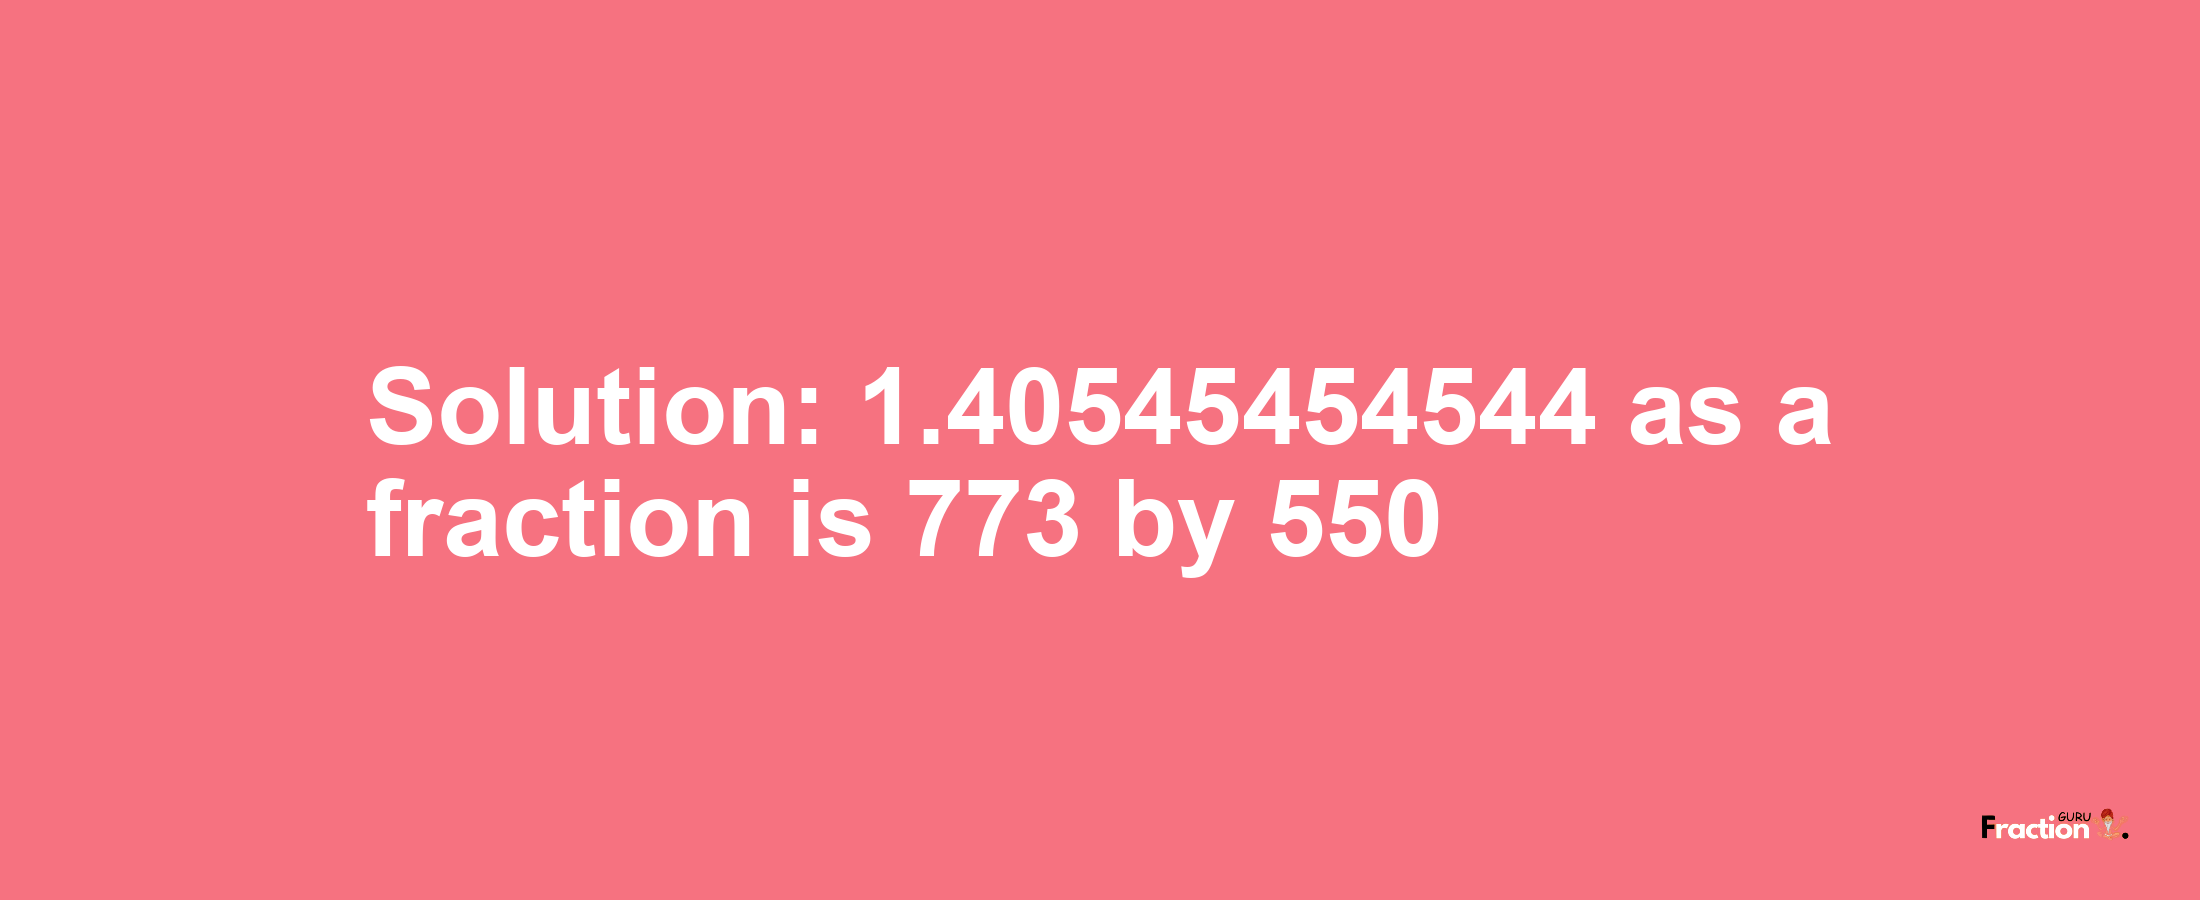 Solution:1.40545454544 as a fraction is 773/550